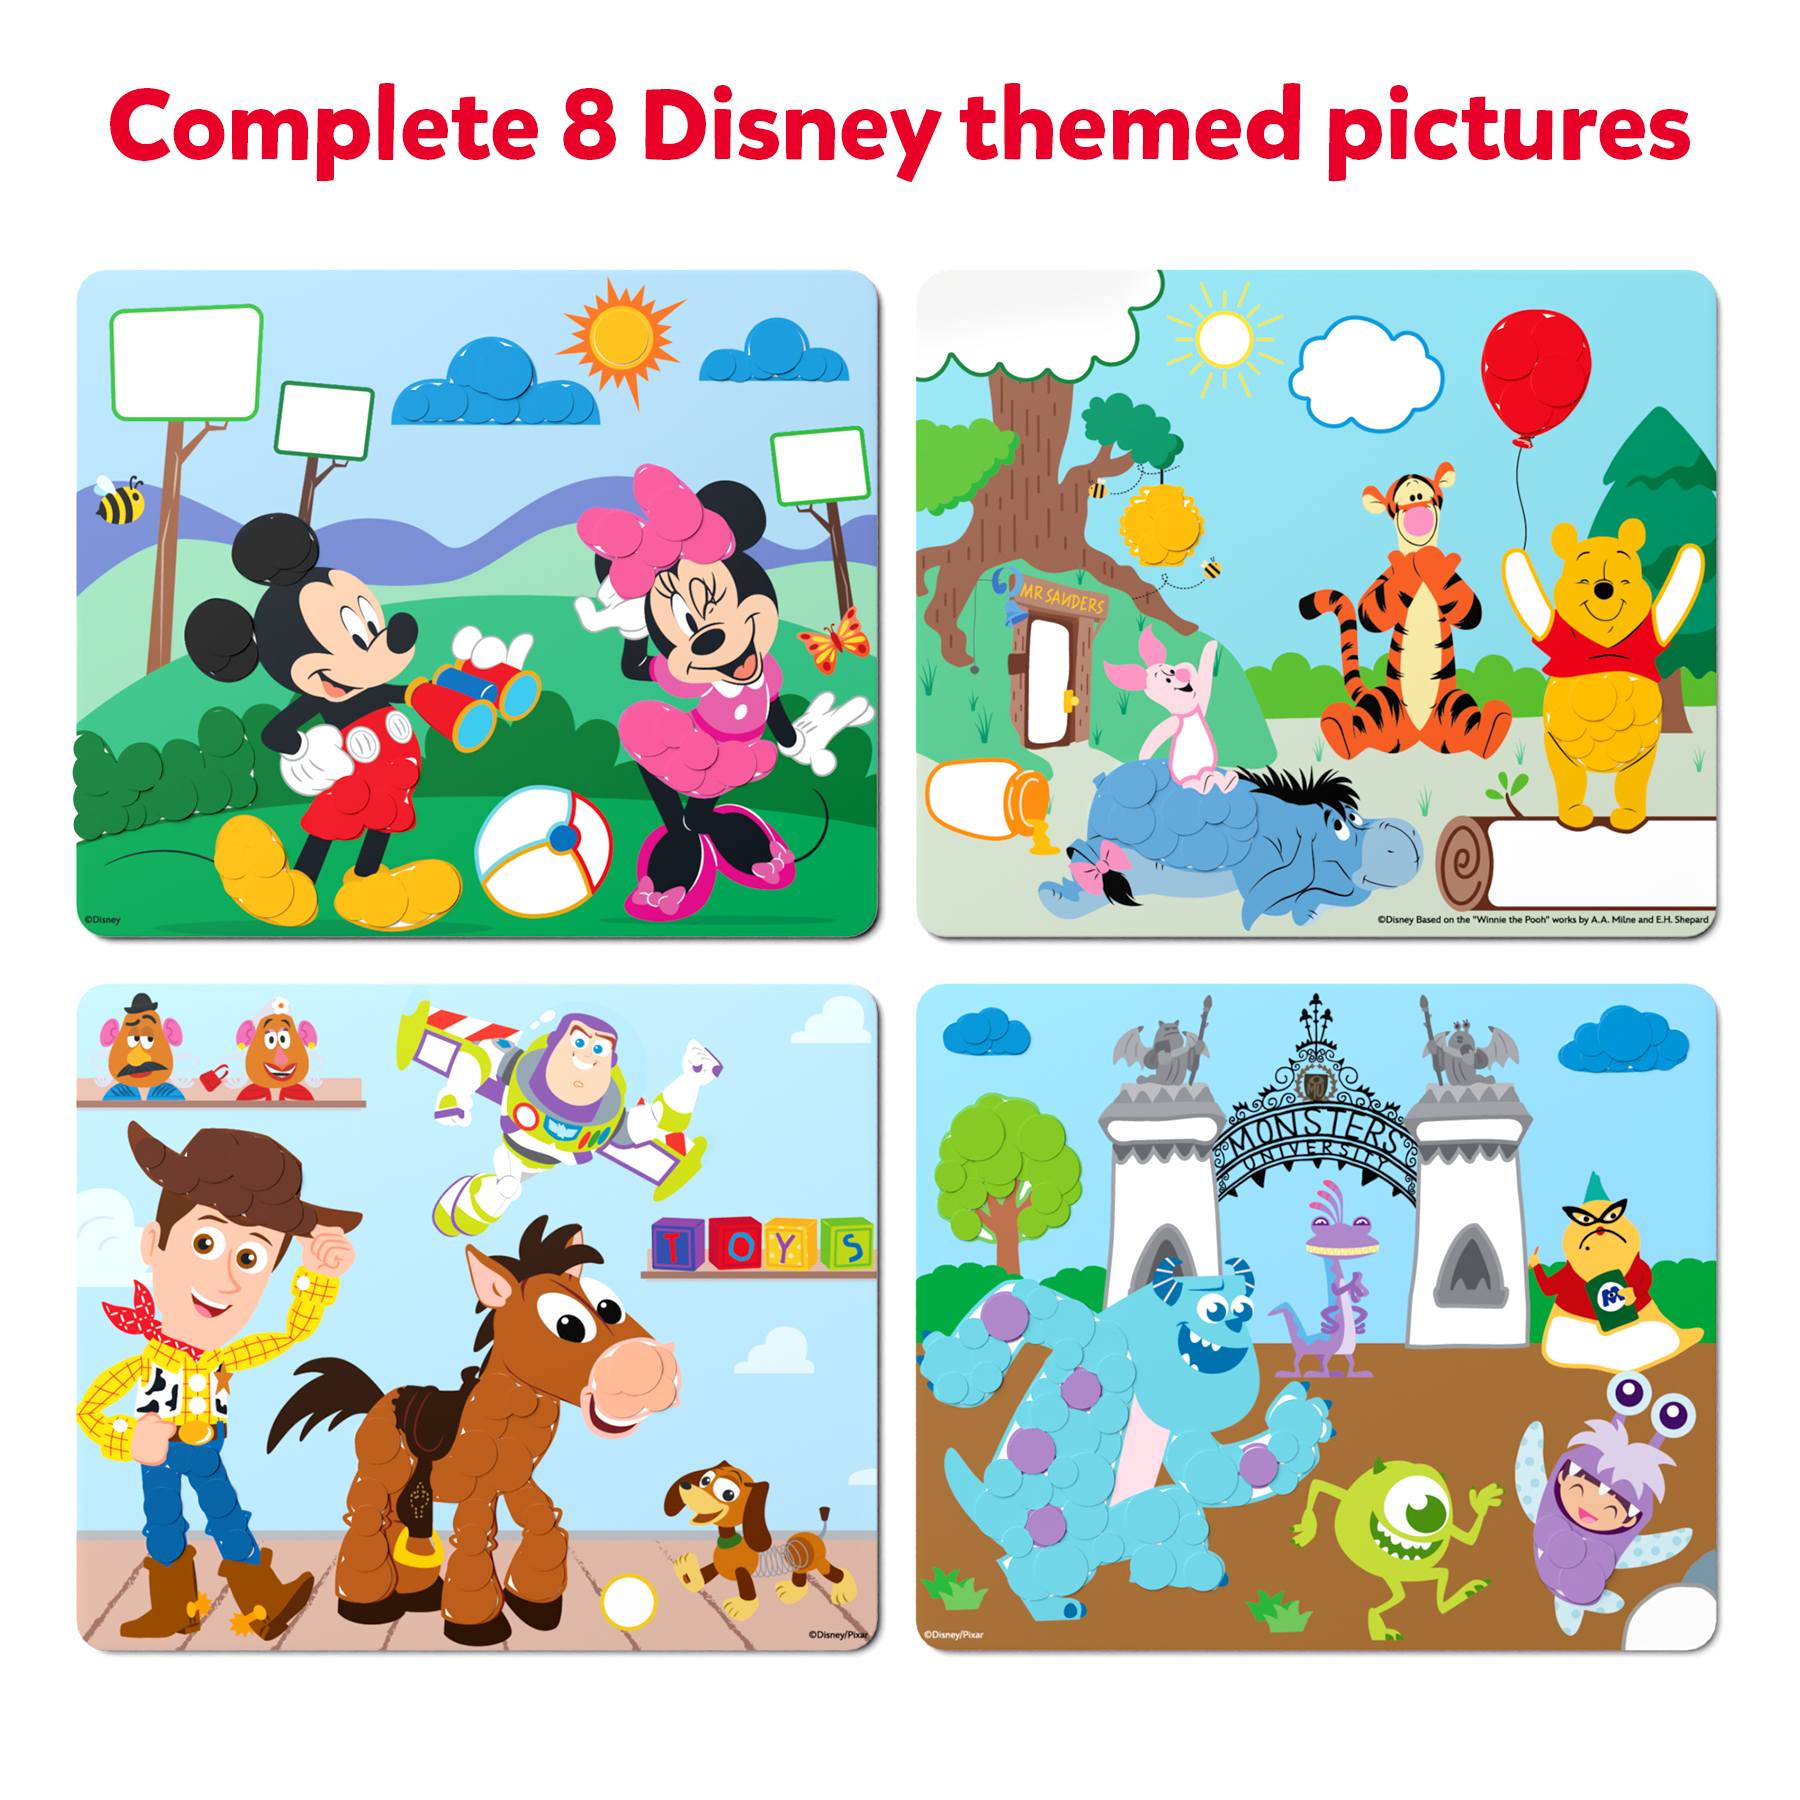 Skillmatics Art Activity - Dot It Disney Edition, No Mess Sticker Art for Kids, Craft Kits, DIY Activity, Gifts for Girls & Boys Ages 3, 4, 5, 6, 7, Travel Toys for Toddlers